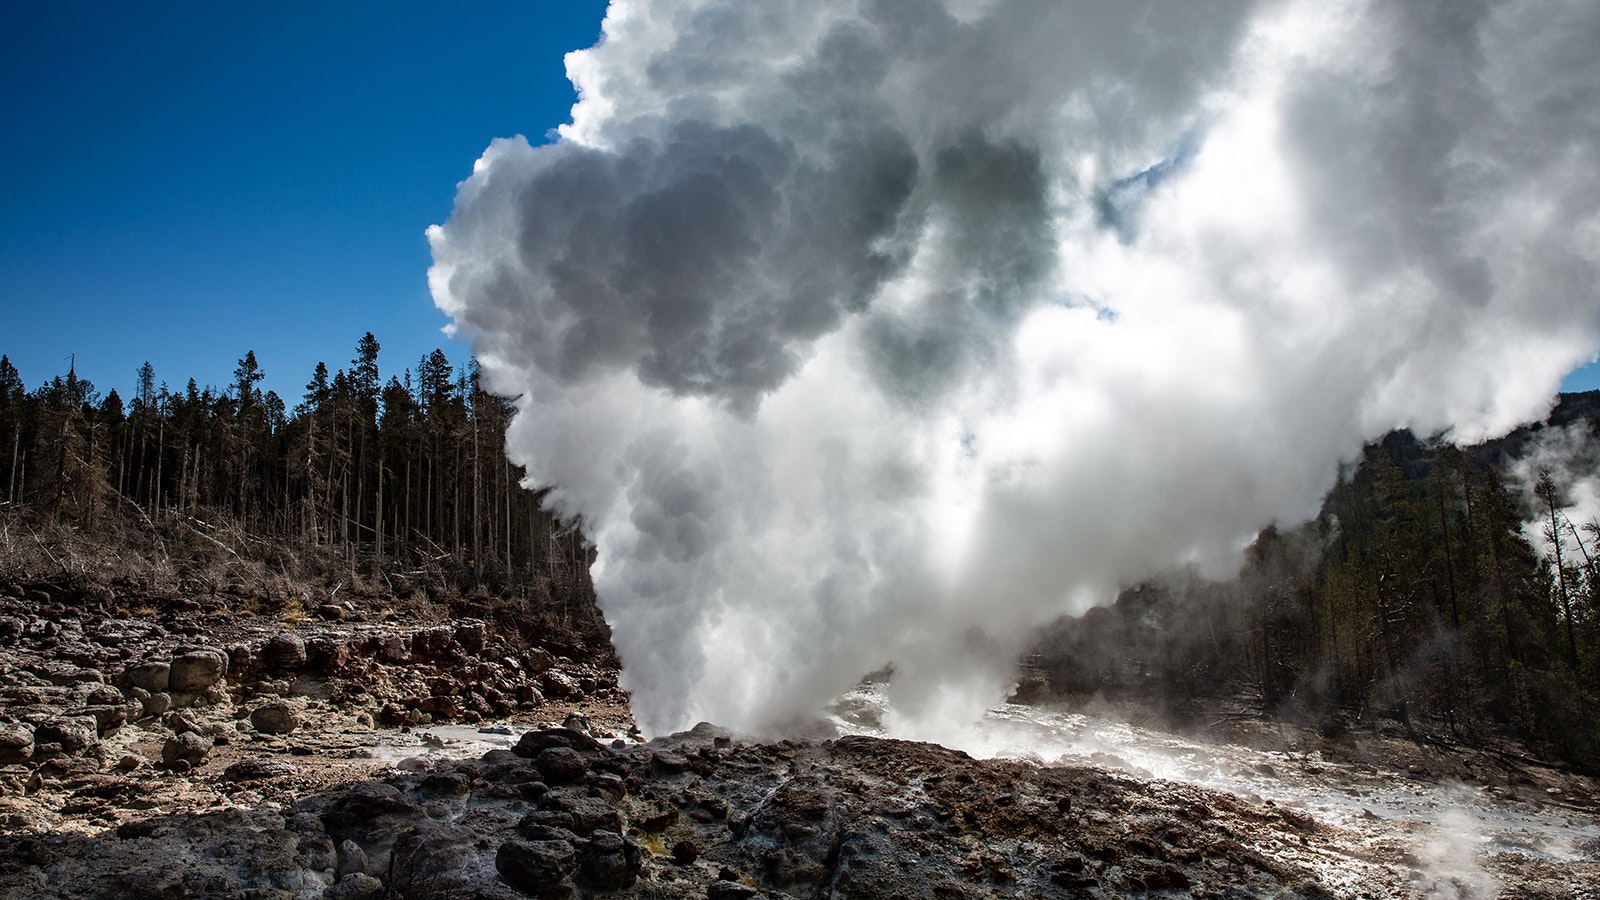 Steamboat Geyser is unpredictable, but has been fairly active in recent years.  Here it will erupt in September 2022.